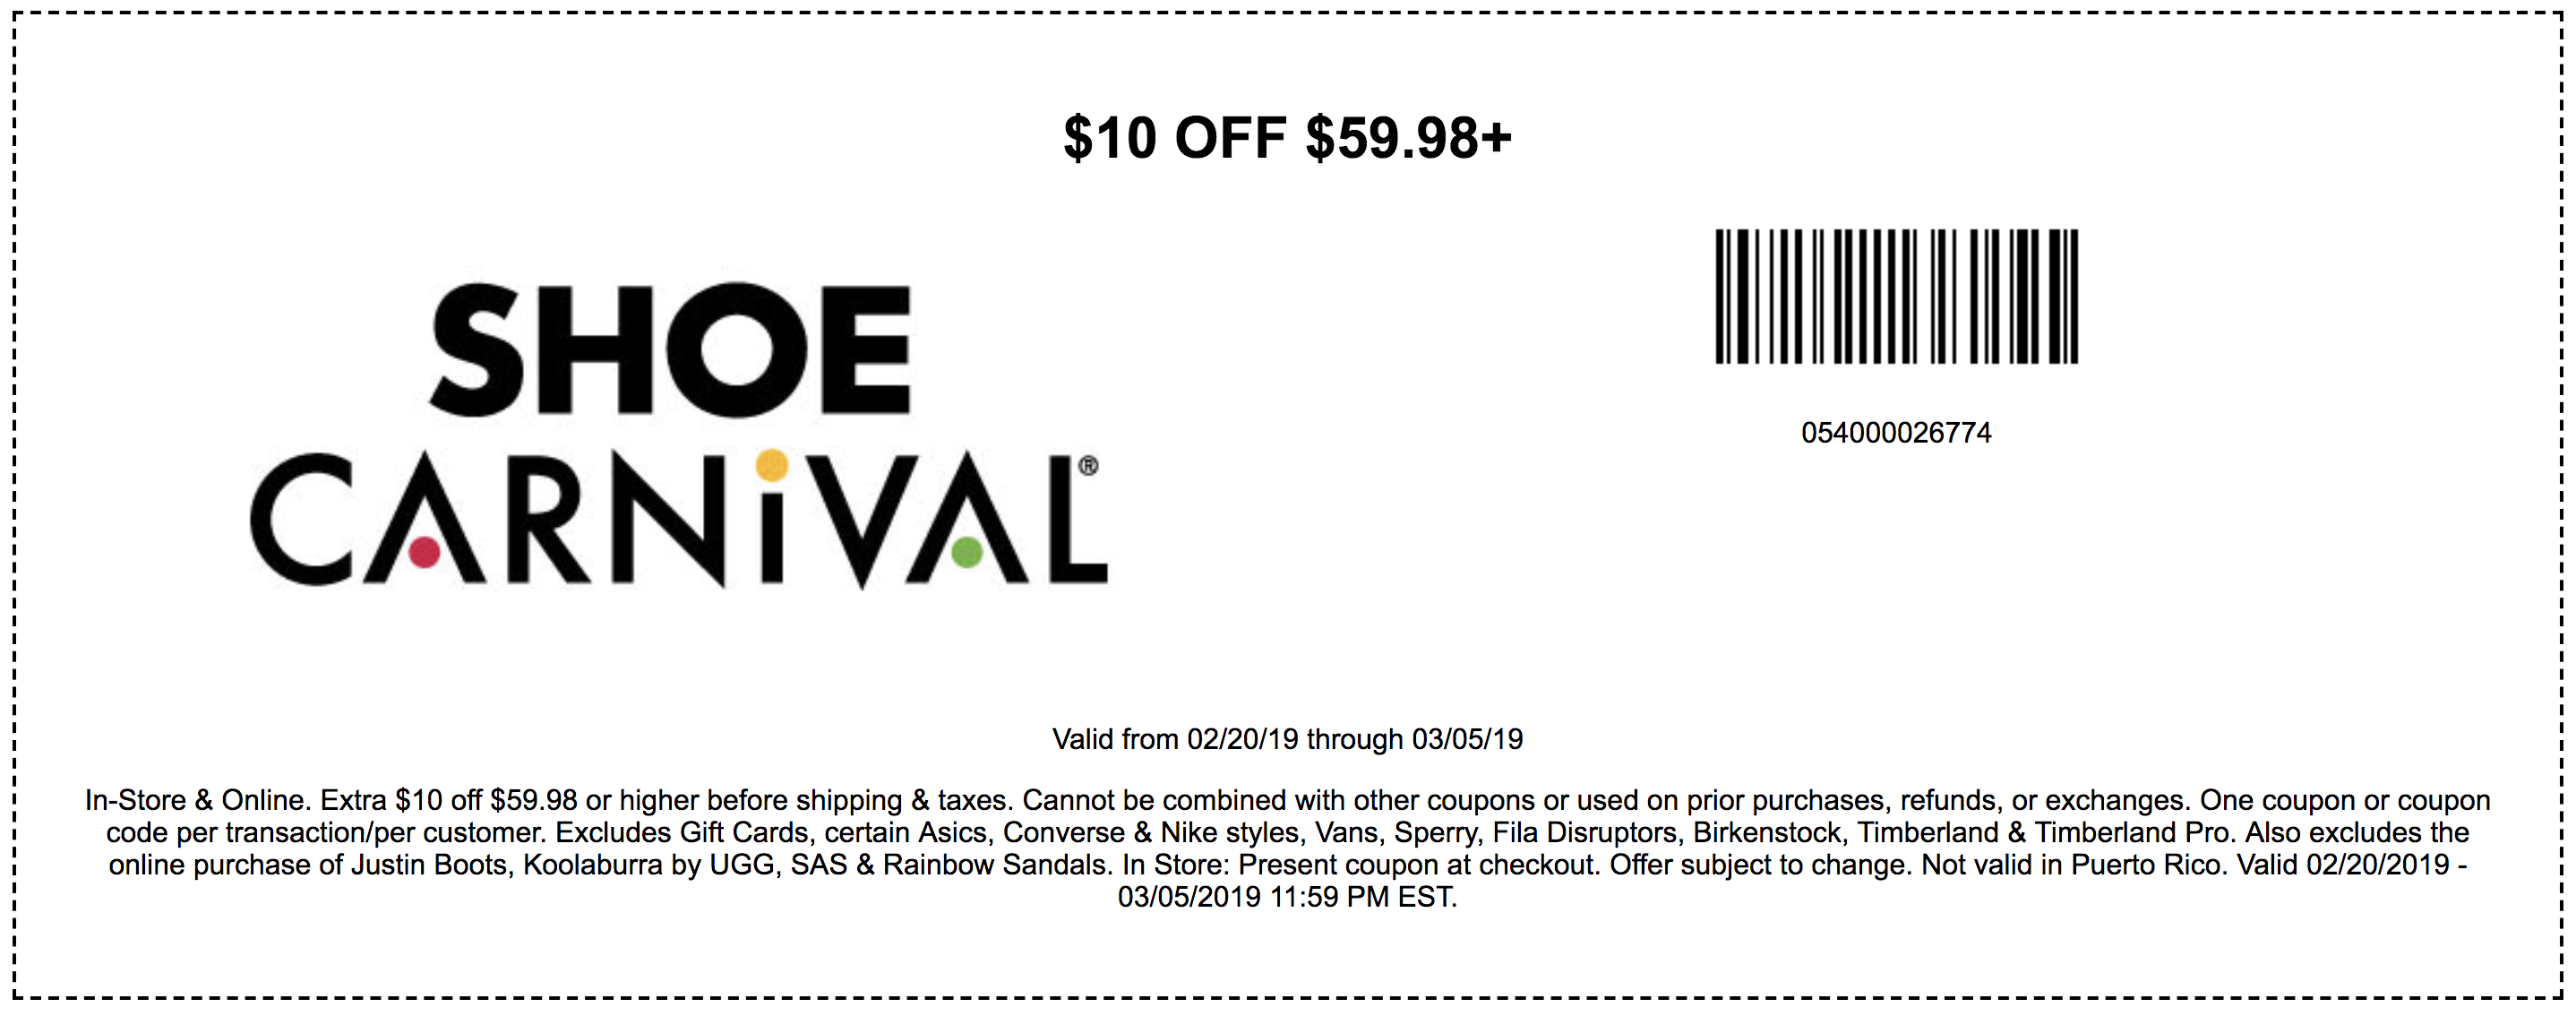 Shoe Carnival Coupons In Store (Printable Coupons) - 2019 - Free Printable Footlocker Coupons